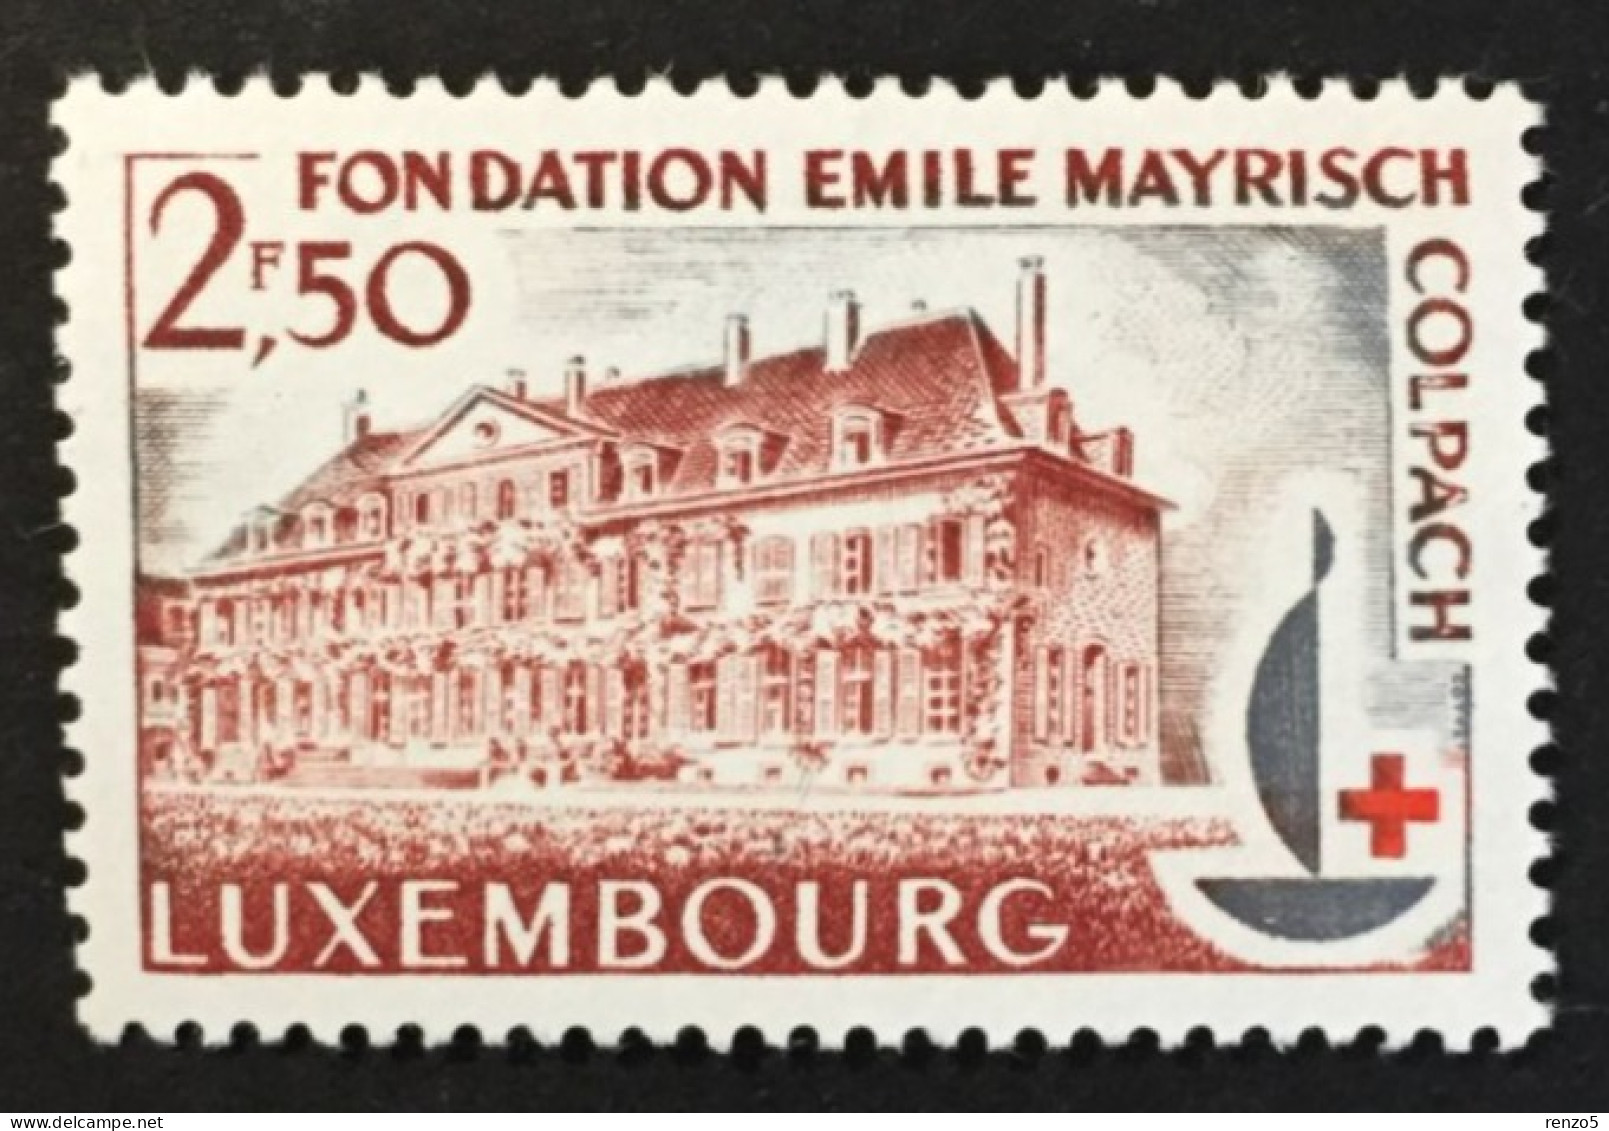 1963 Luxembourg - Colpach Castle And The Centenary Emblem Red Cross - Unused ( Imperfect Gum ) - Nuovi